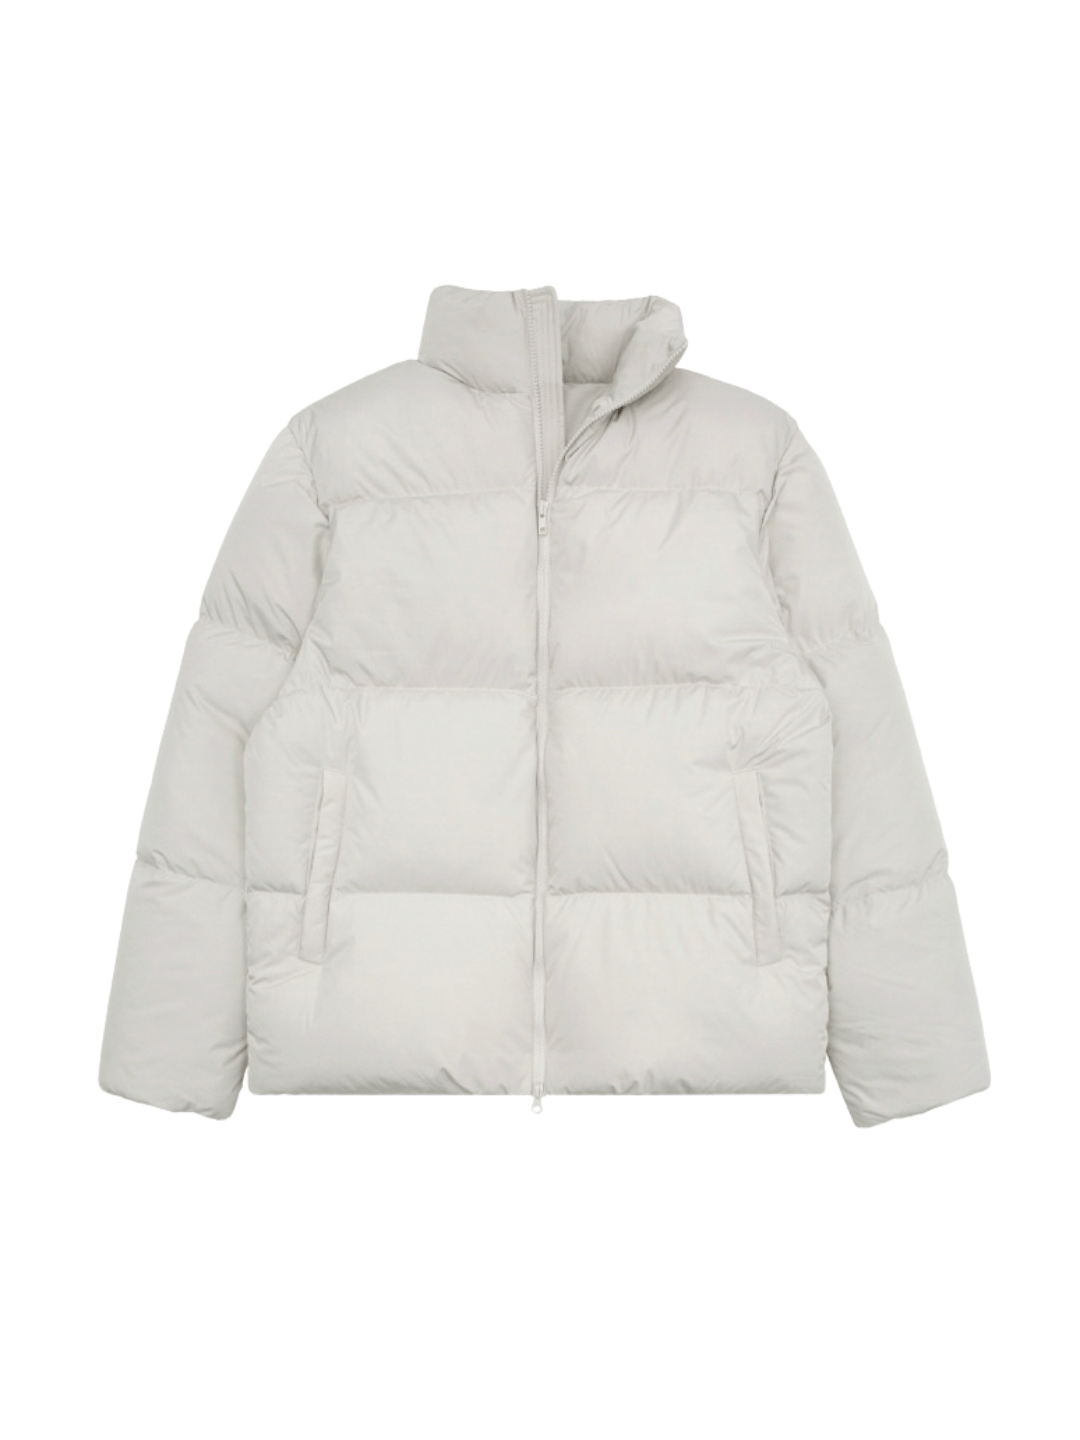 [luxe__05] Trend White Jacket NA551